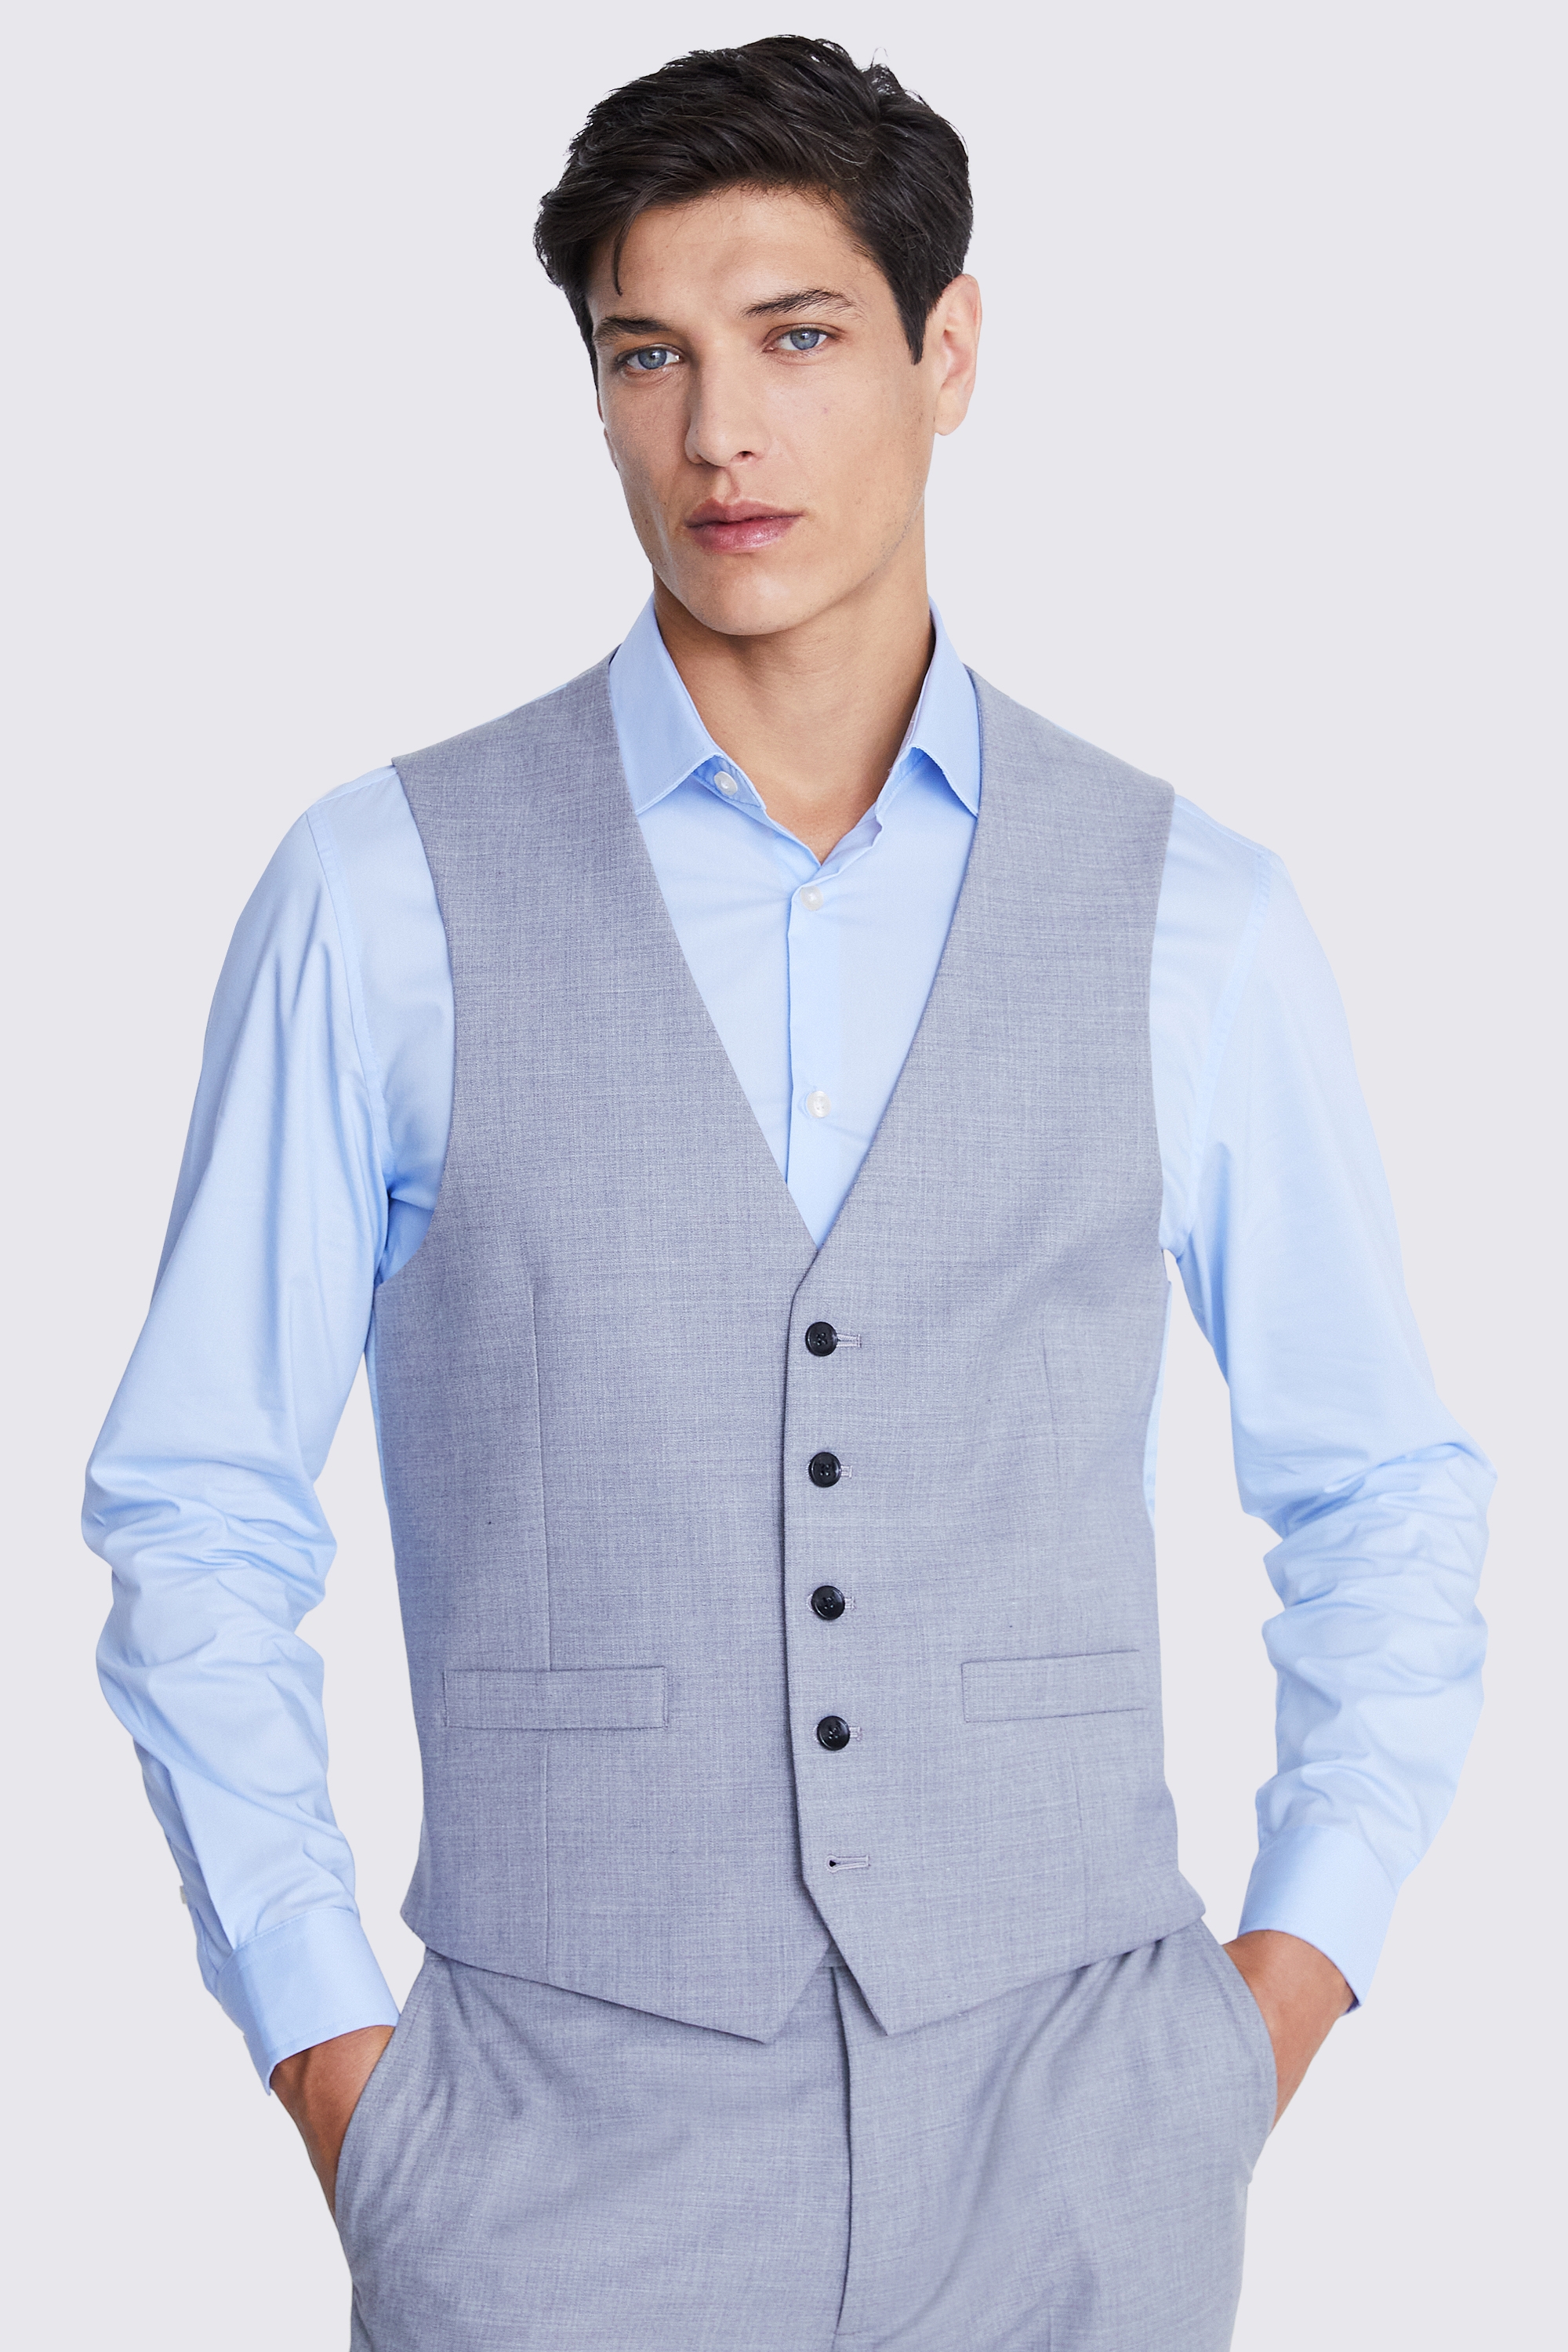 Buy MOSS Performance Tailored Fit Light Grey Suit Waistcoat from the Next  UK online shop